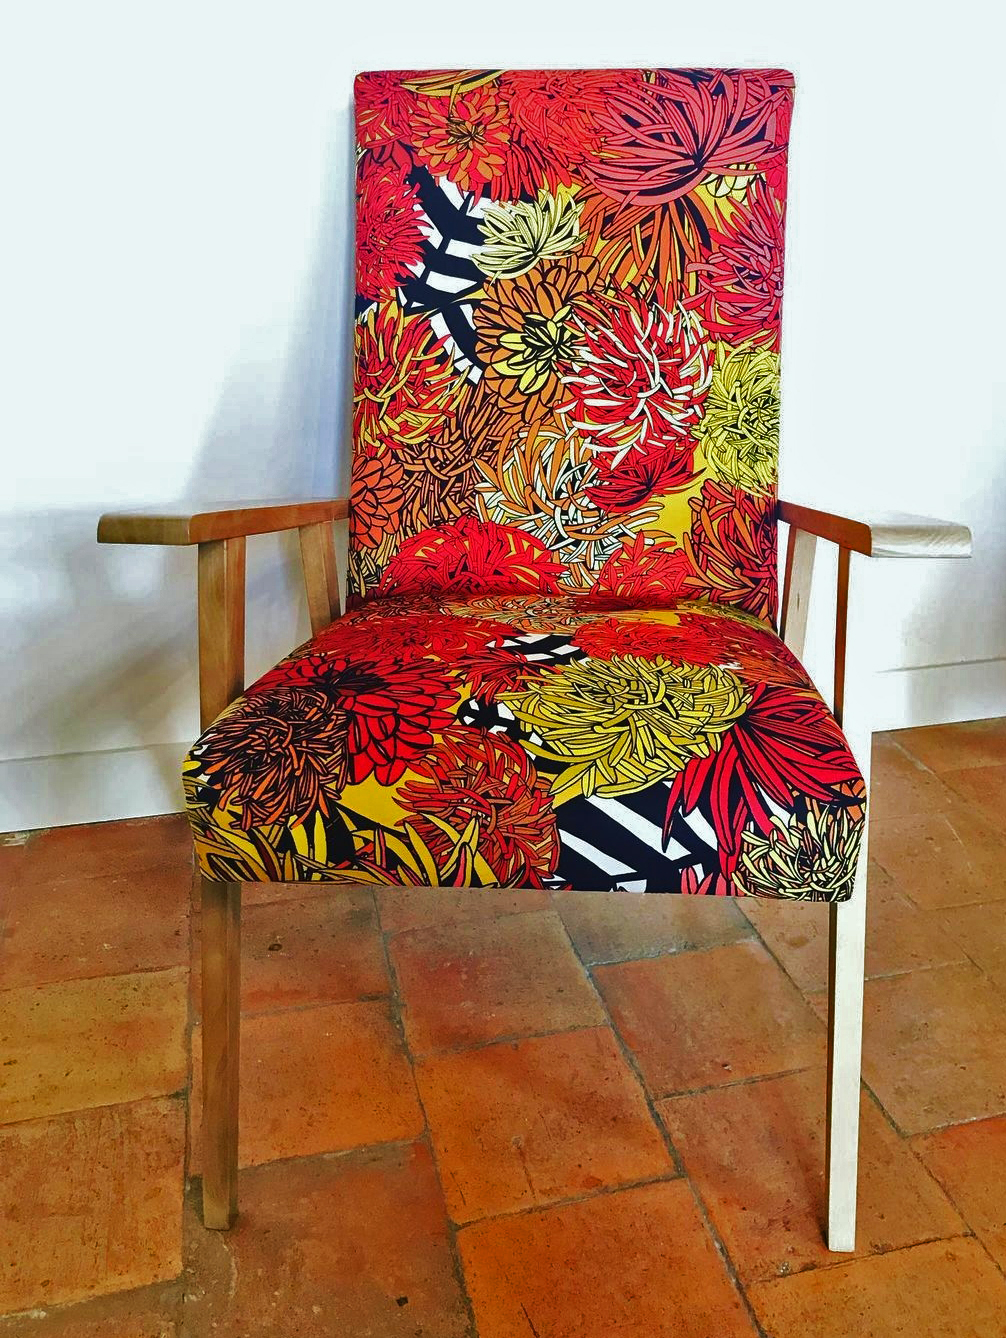 Motif Décoration Collection All Dahlia n°9 Tissus Floral Rouge Orange by Zéphyr and Co